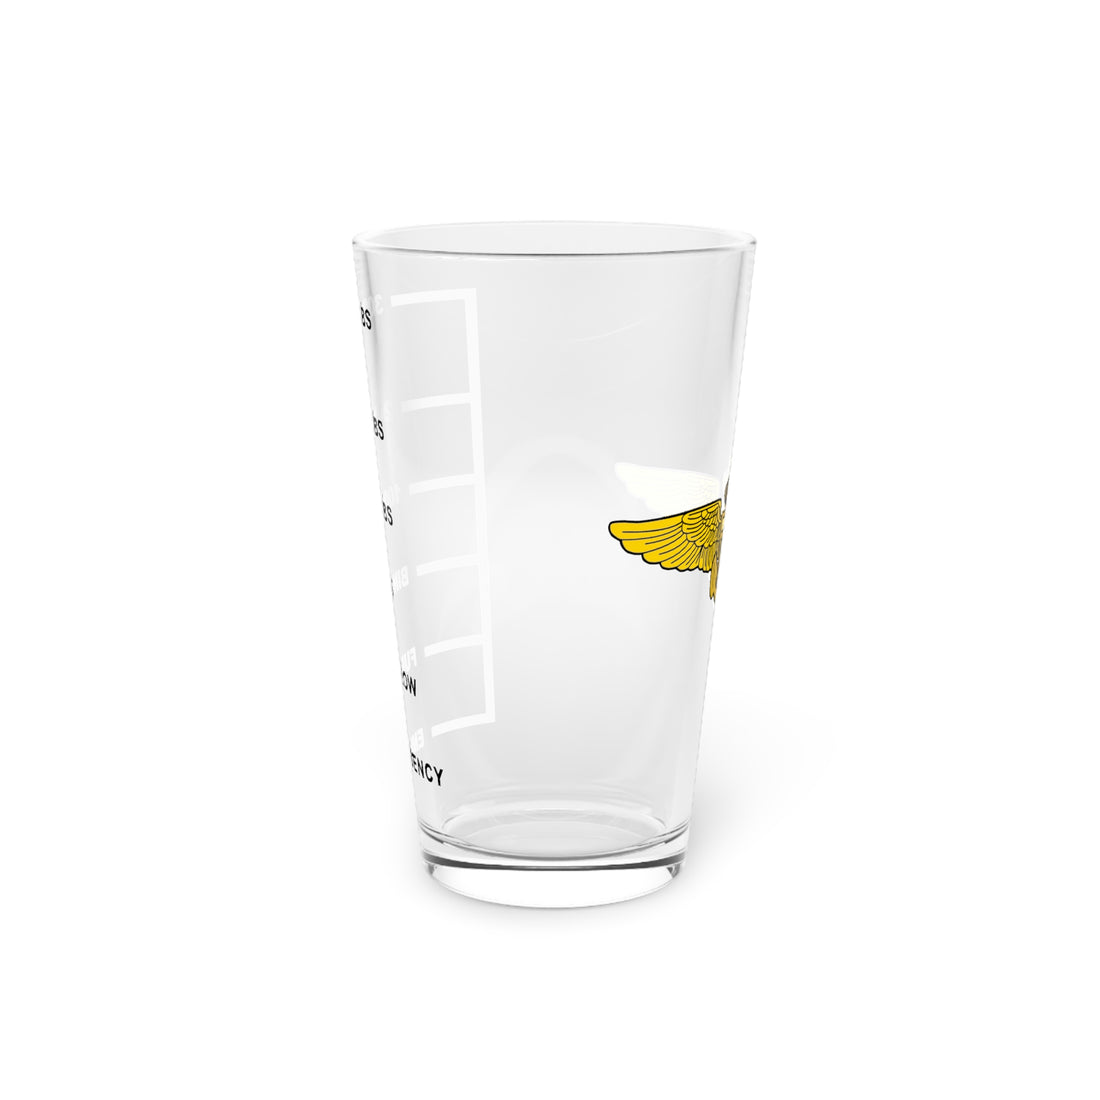 Naval Aviator Wings - Fuel Low Pint Glass, Beer Glass for the Aviator who knows when it is time to Refuel